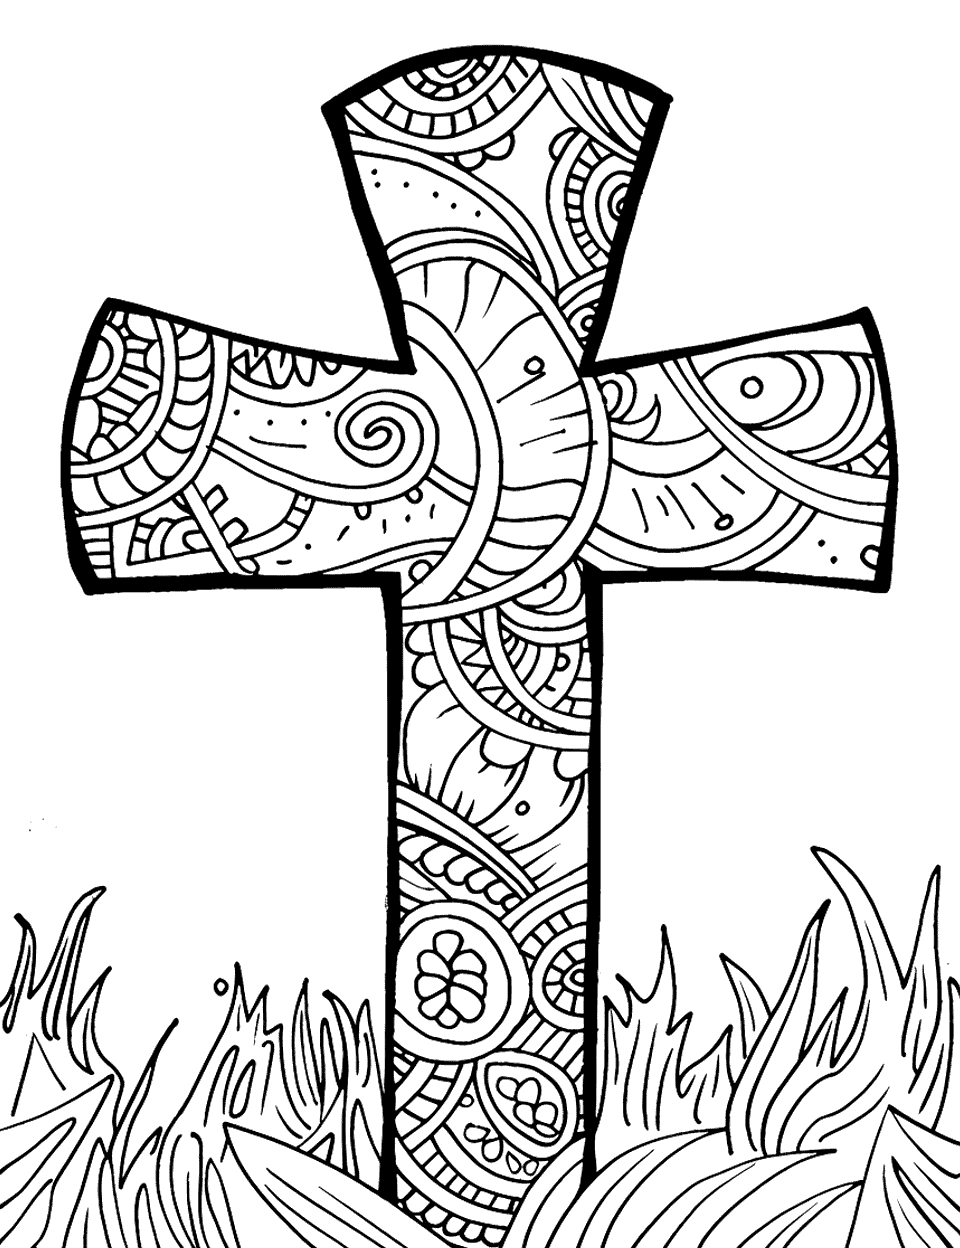 Artistic Pattern Cross Coloring Page - A cross filled with intricate patterns and designs for detailed coloring.